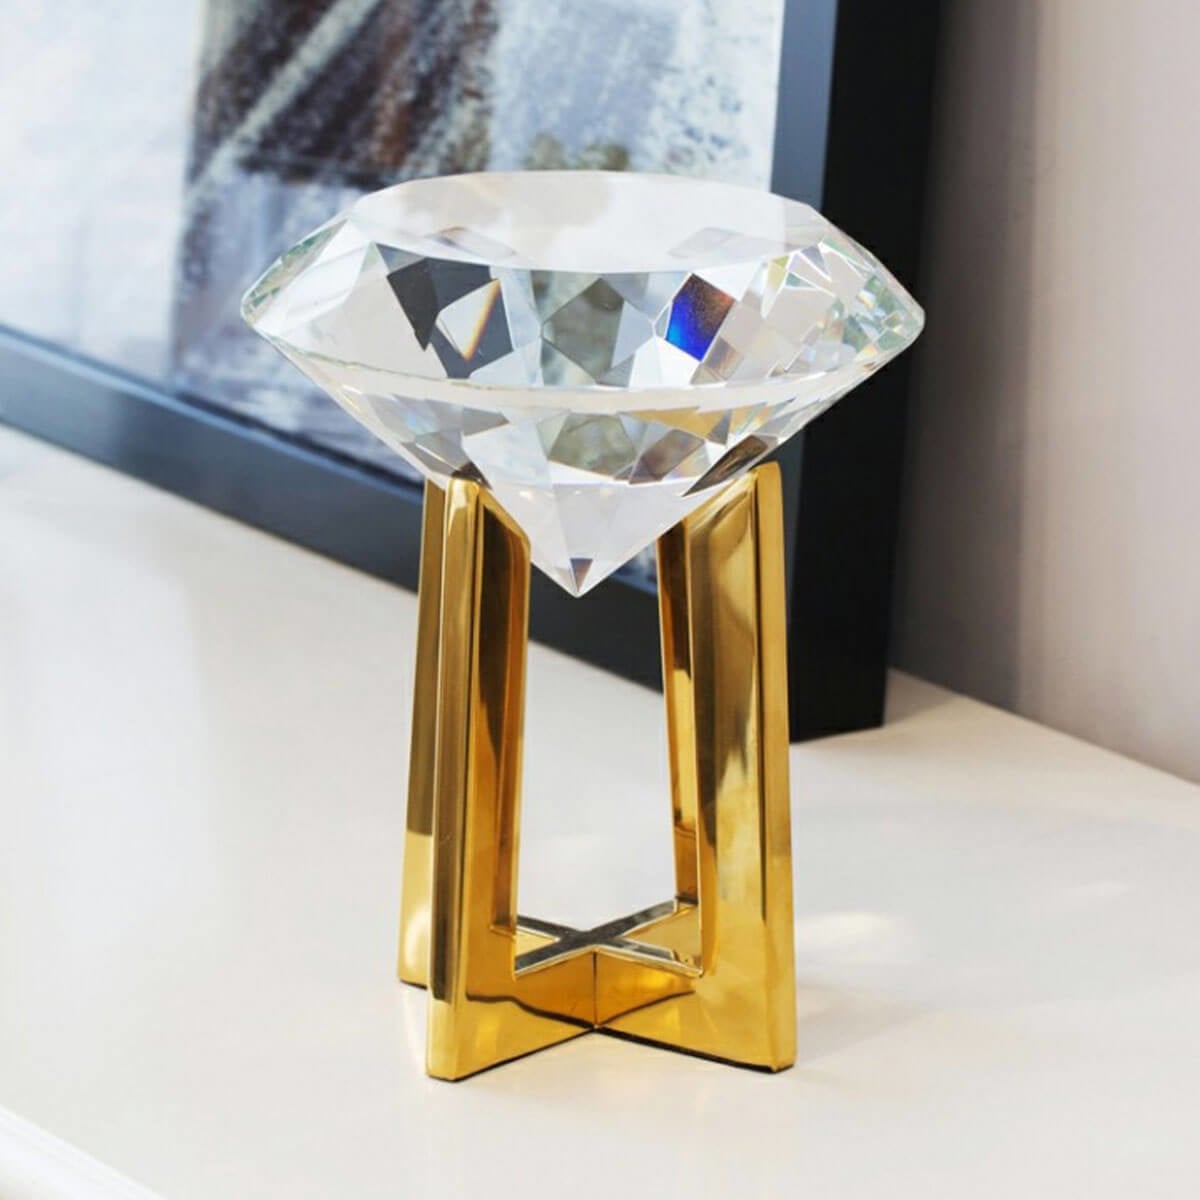 Diamond Shape Crystal with Gold Stainless Steel Statue